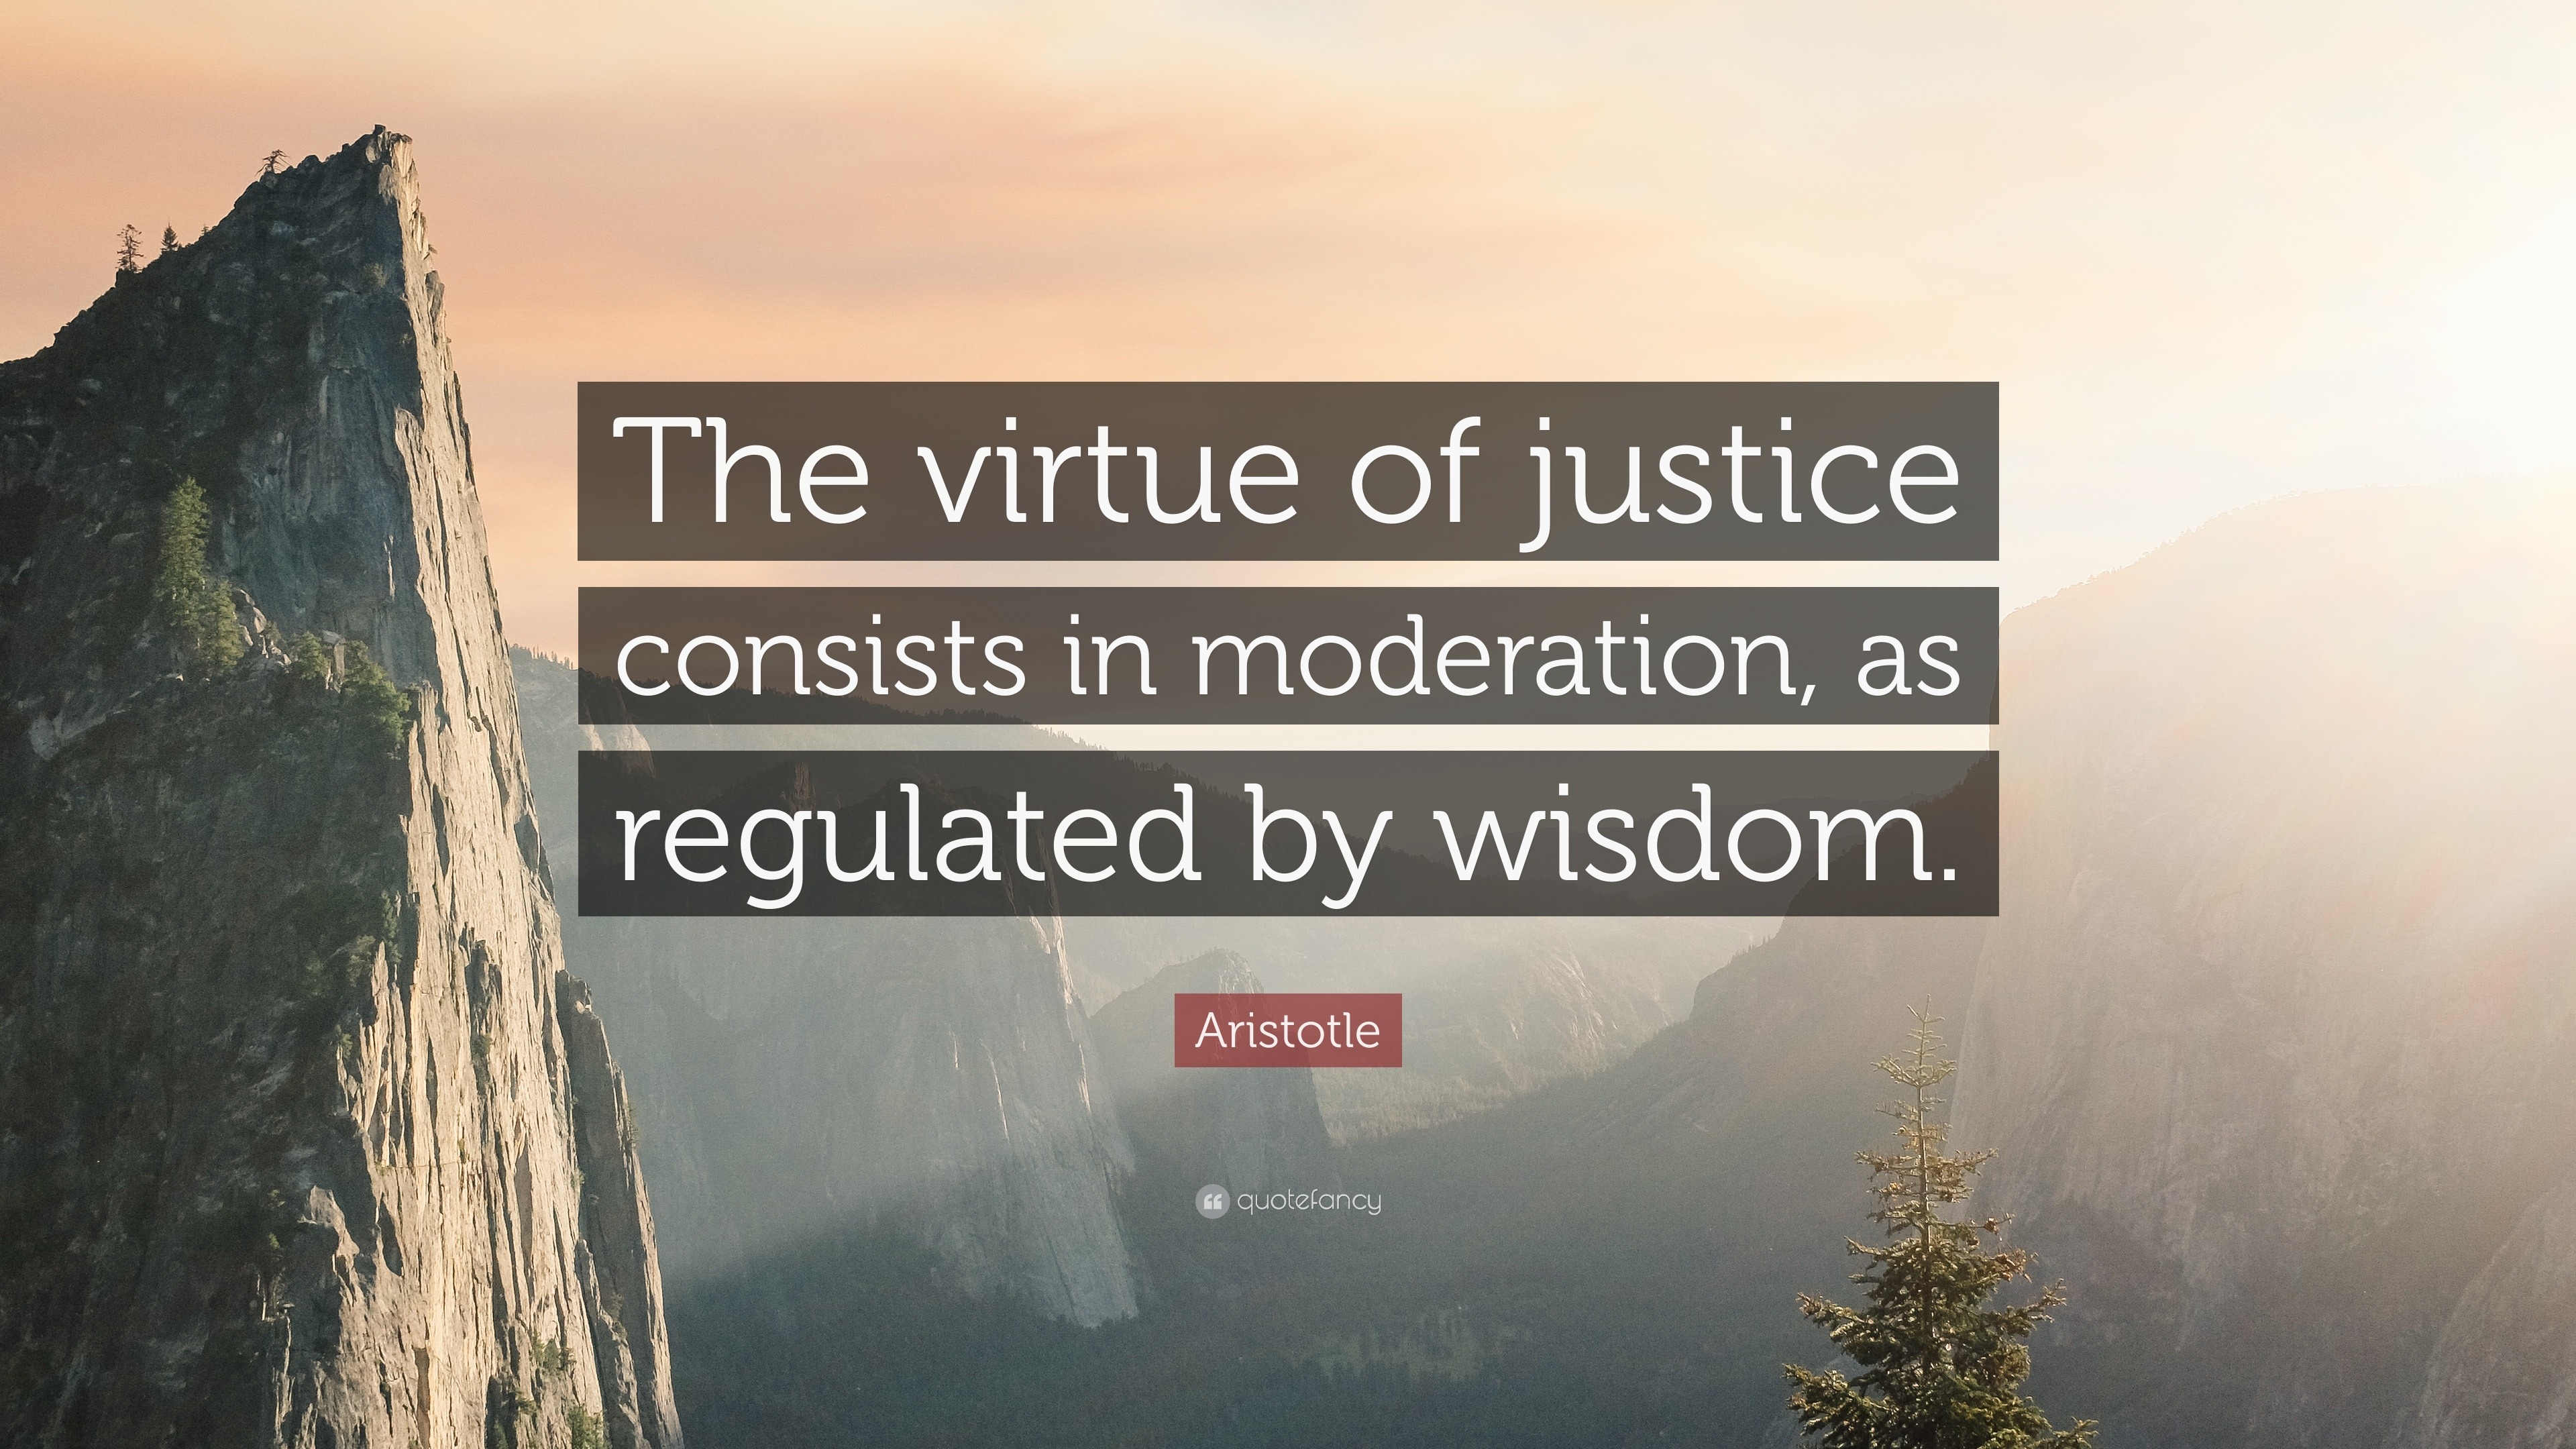 Aristotle Quote “The virtue of justice consists in